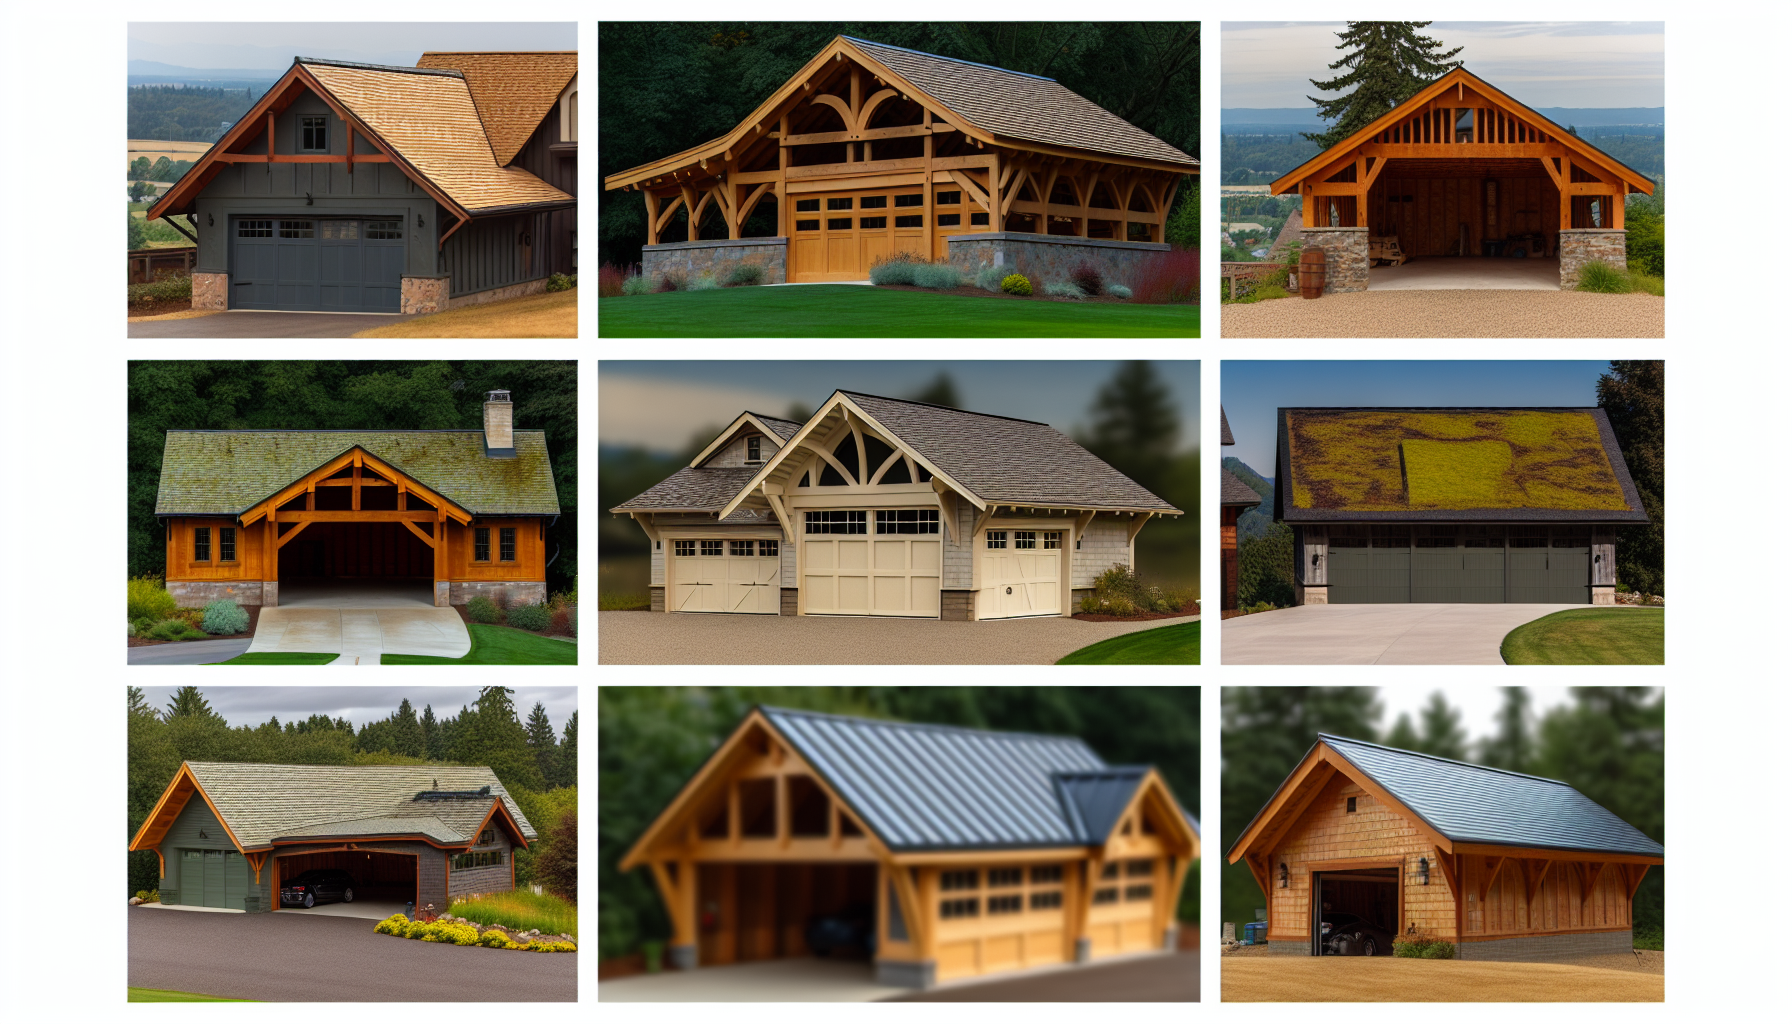 Gallery of timber frame garages showcasing different styles and roofing options